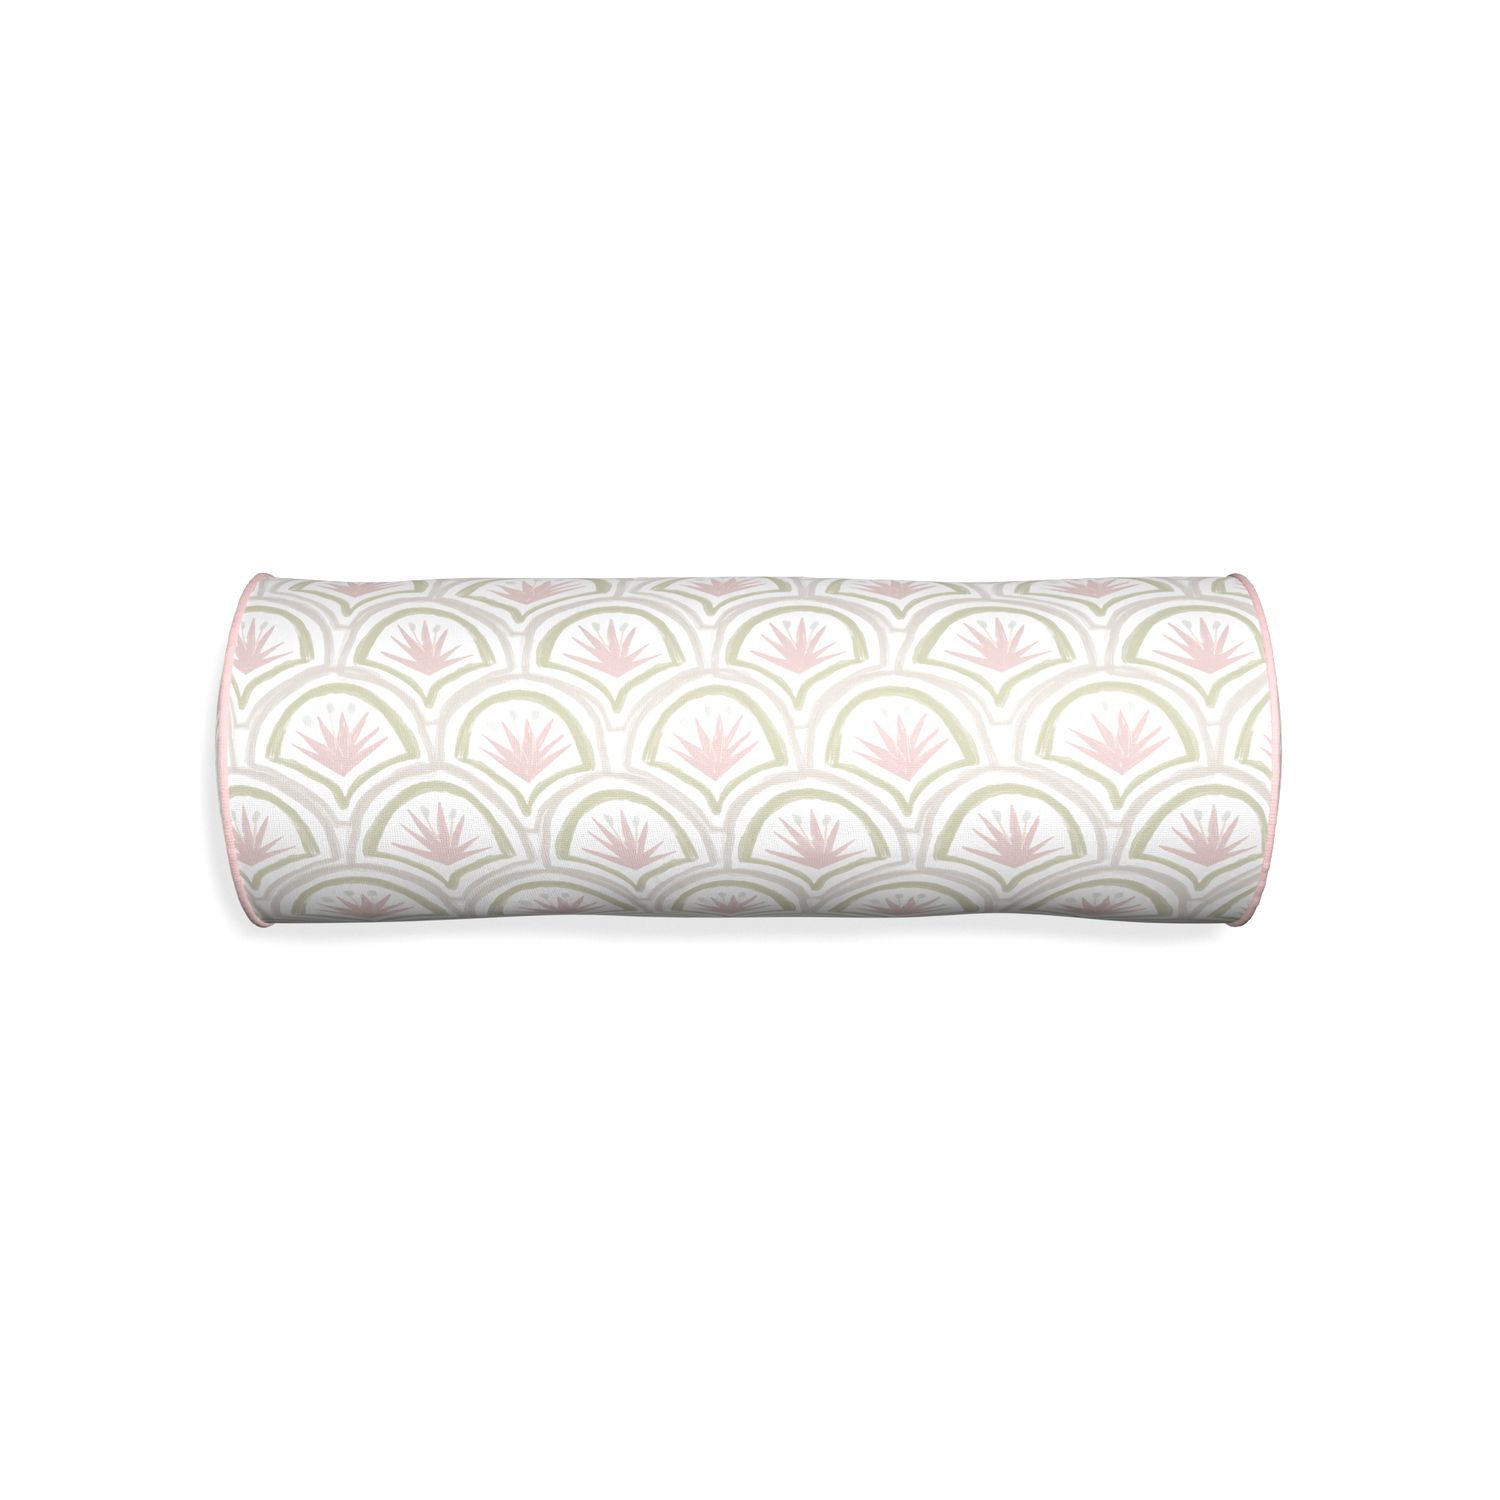 Bolster thatcher rose custom pillow with petal piping on white background